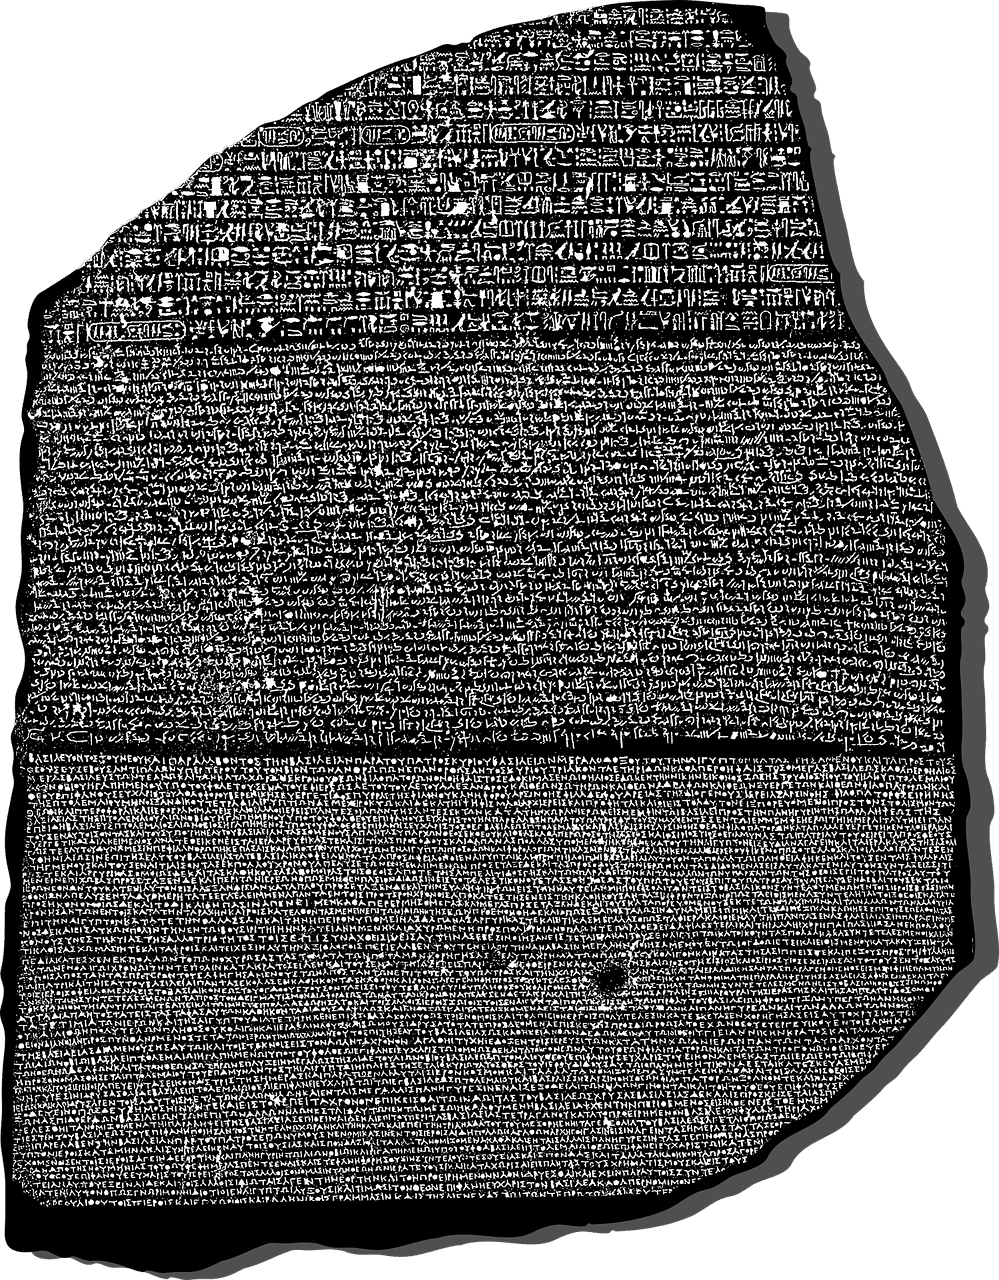 13 Revealing Facts About The Rosetta Stone Facts